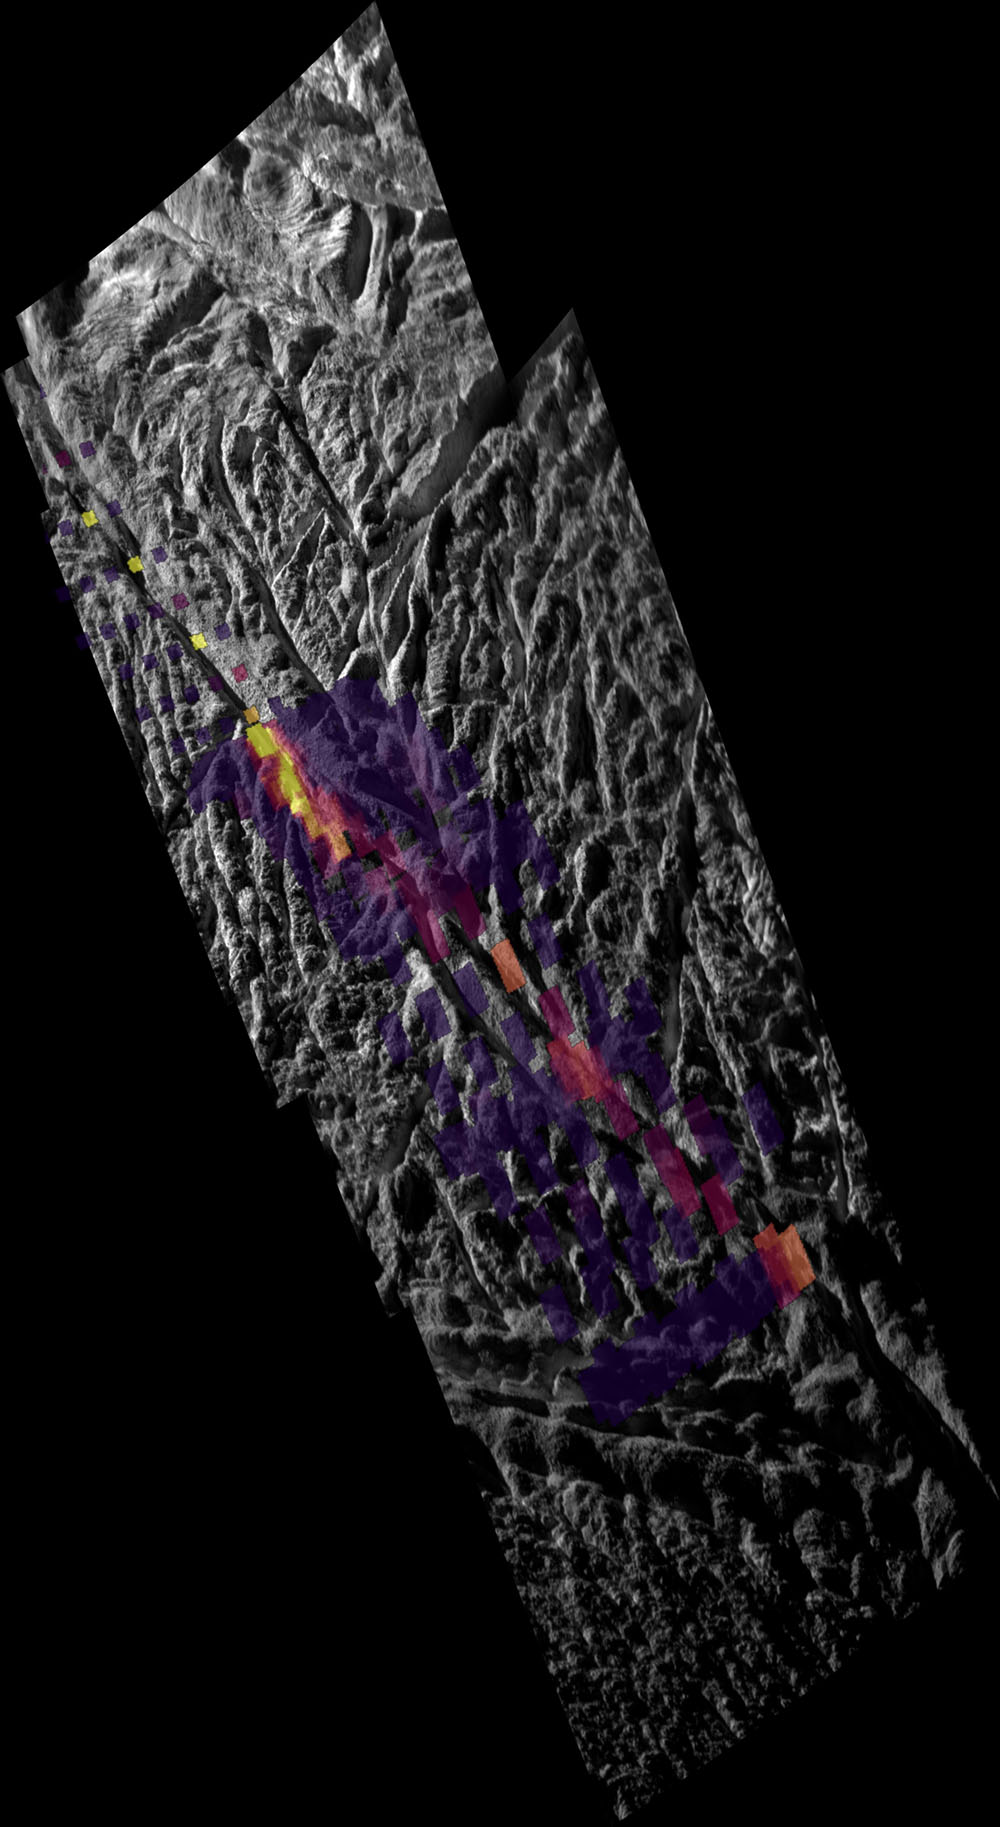 In this unique mosaic image combining high-resolution data from the imaging science subsystem and composite infrared spectrometer aboard NASA's Cassini spacecraft, pockets of heat appear along one of the mysterious fractures in the south polar region of Saturn's moon Enceladus.